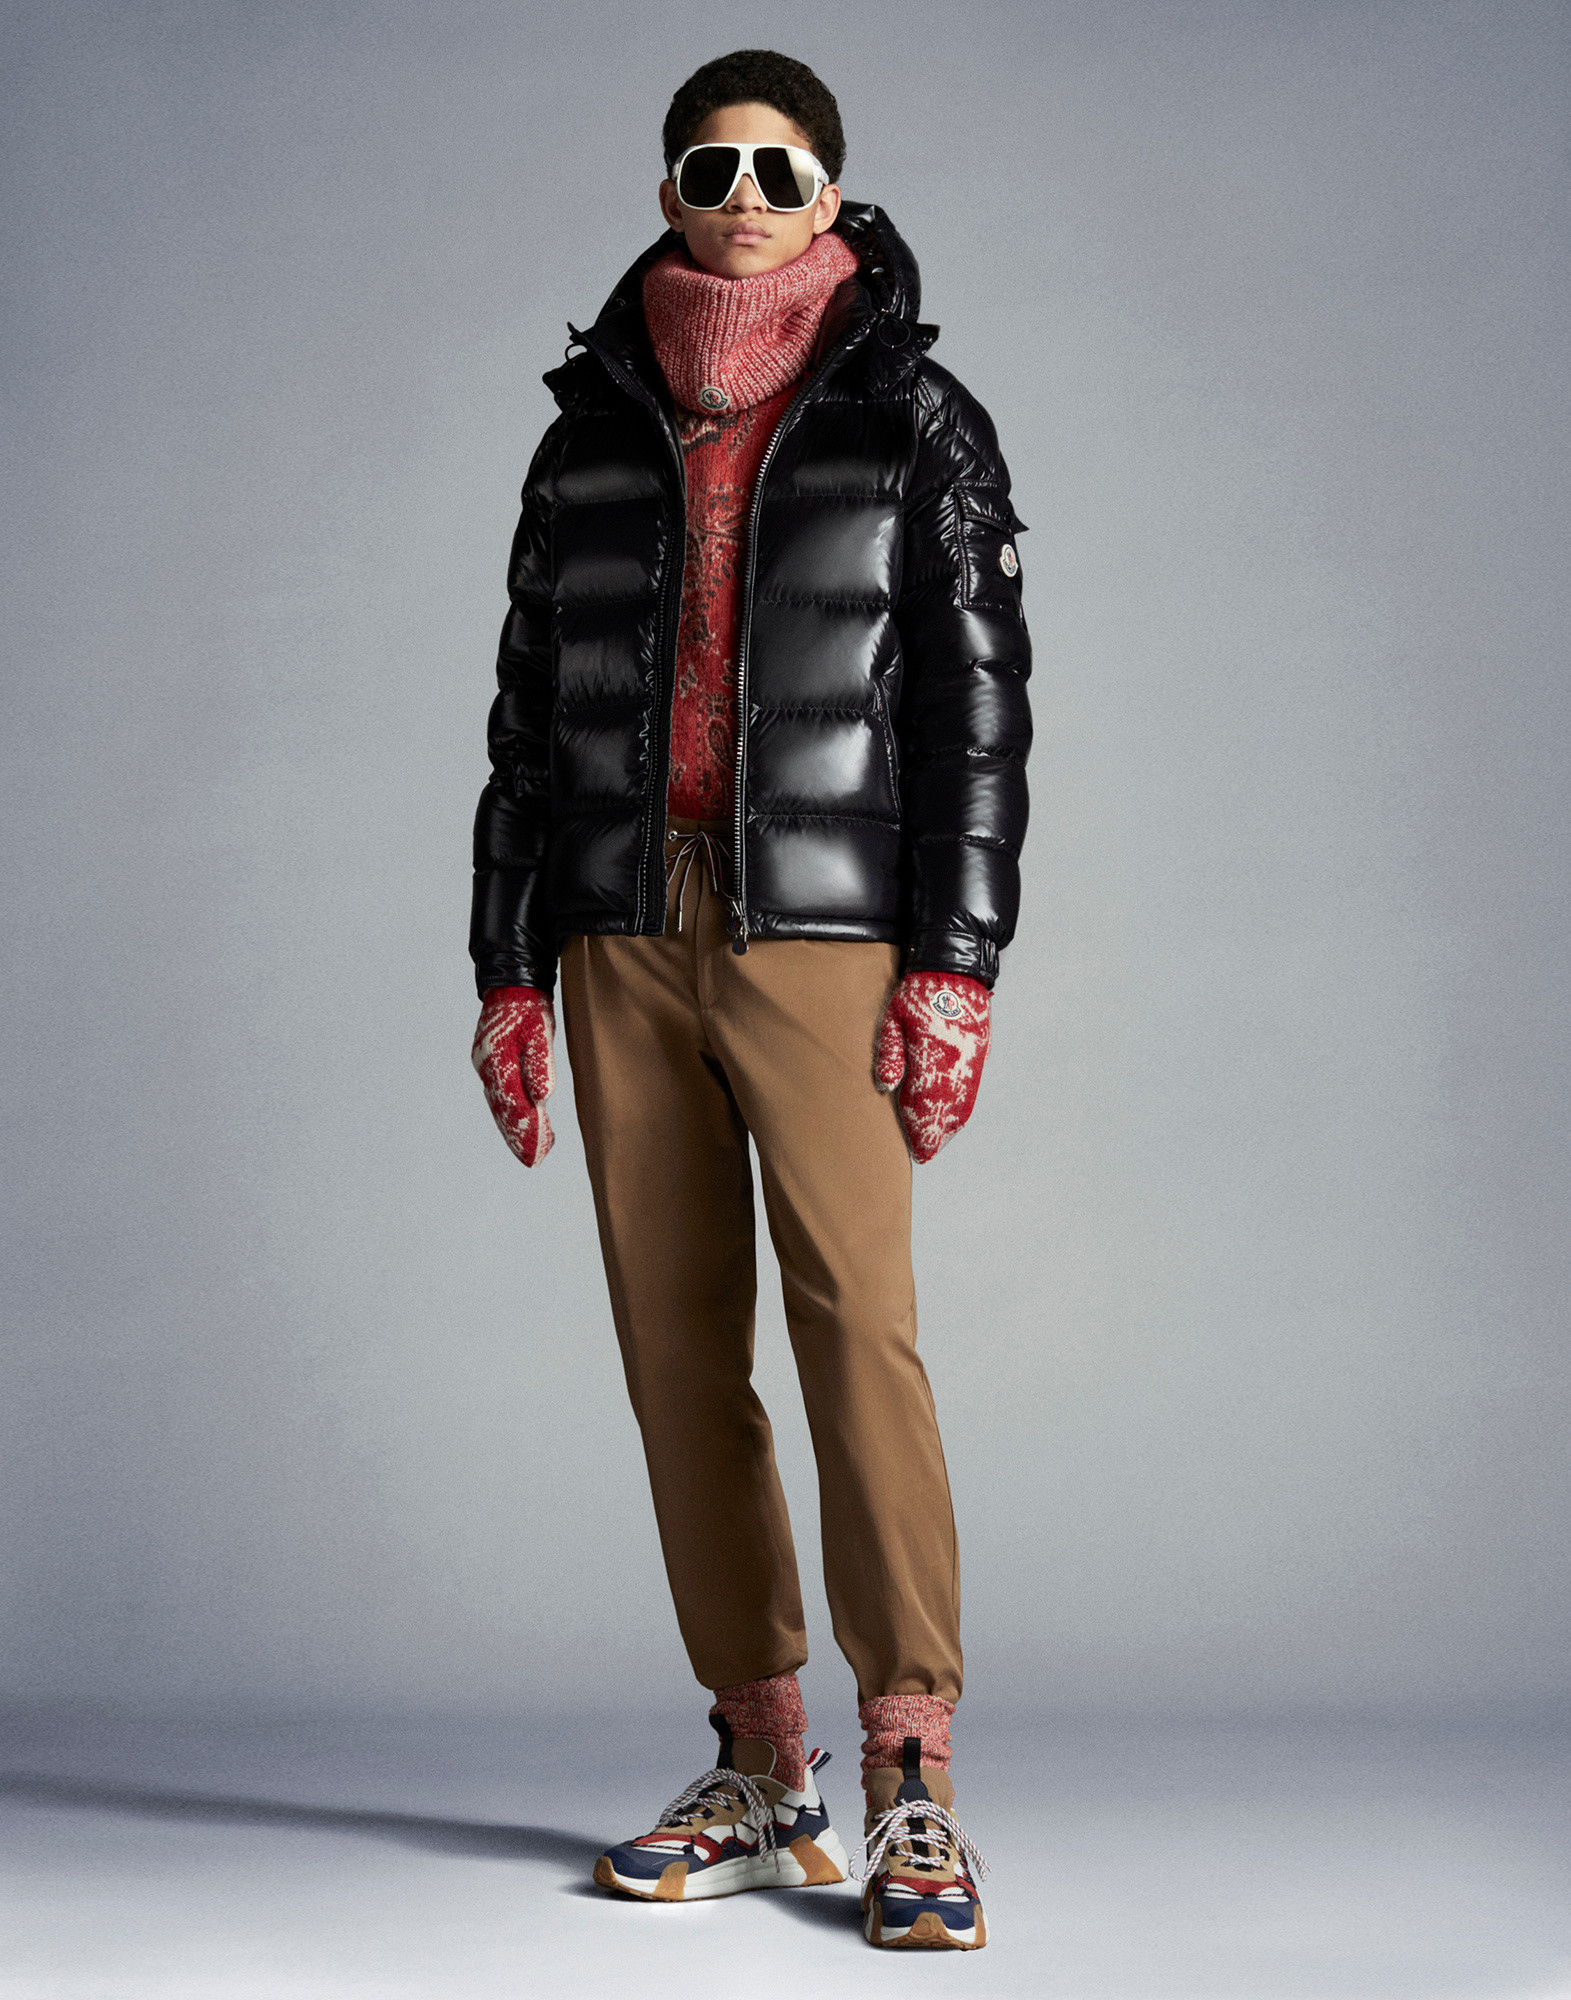 Men's Clothing, Accessories and Down Jackets | Moncler NO